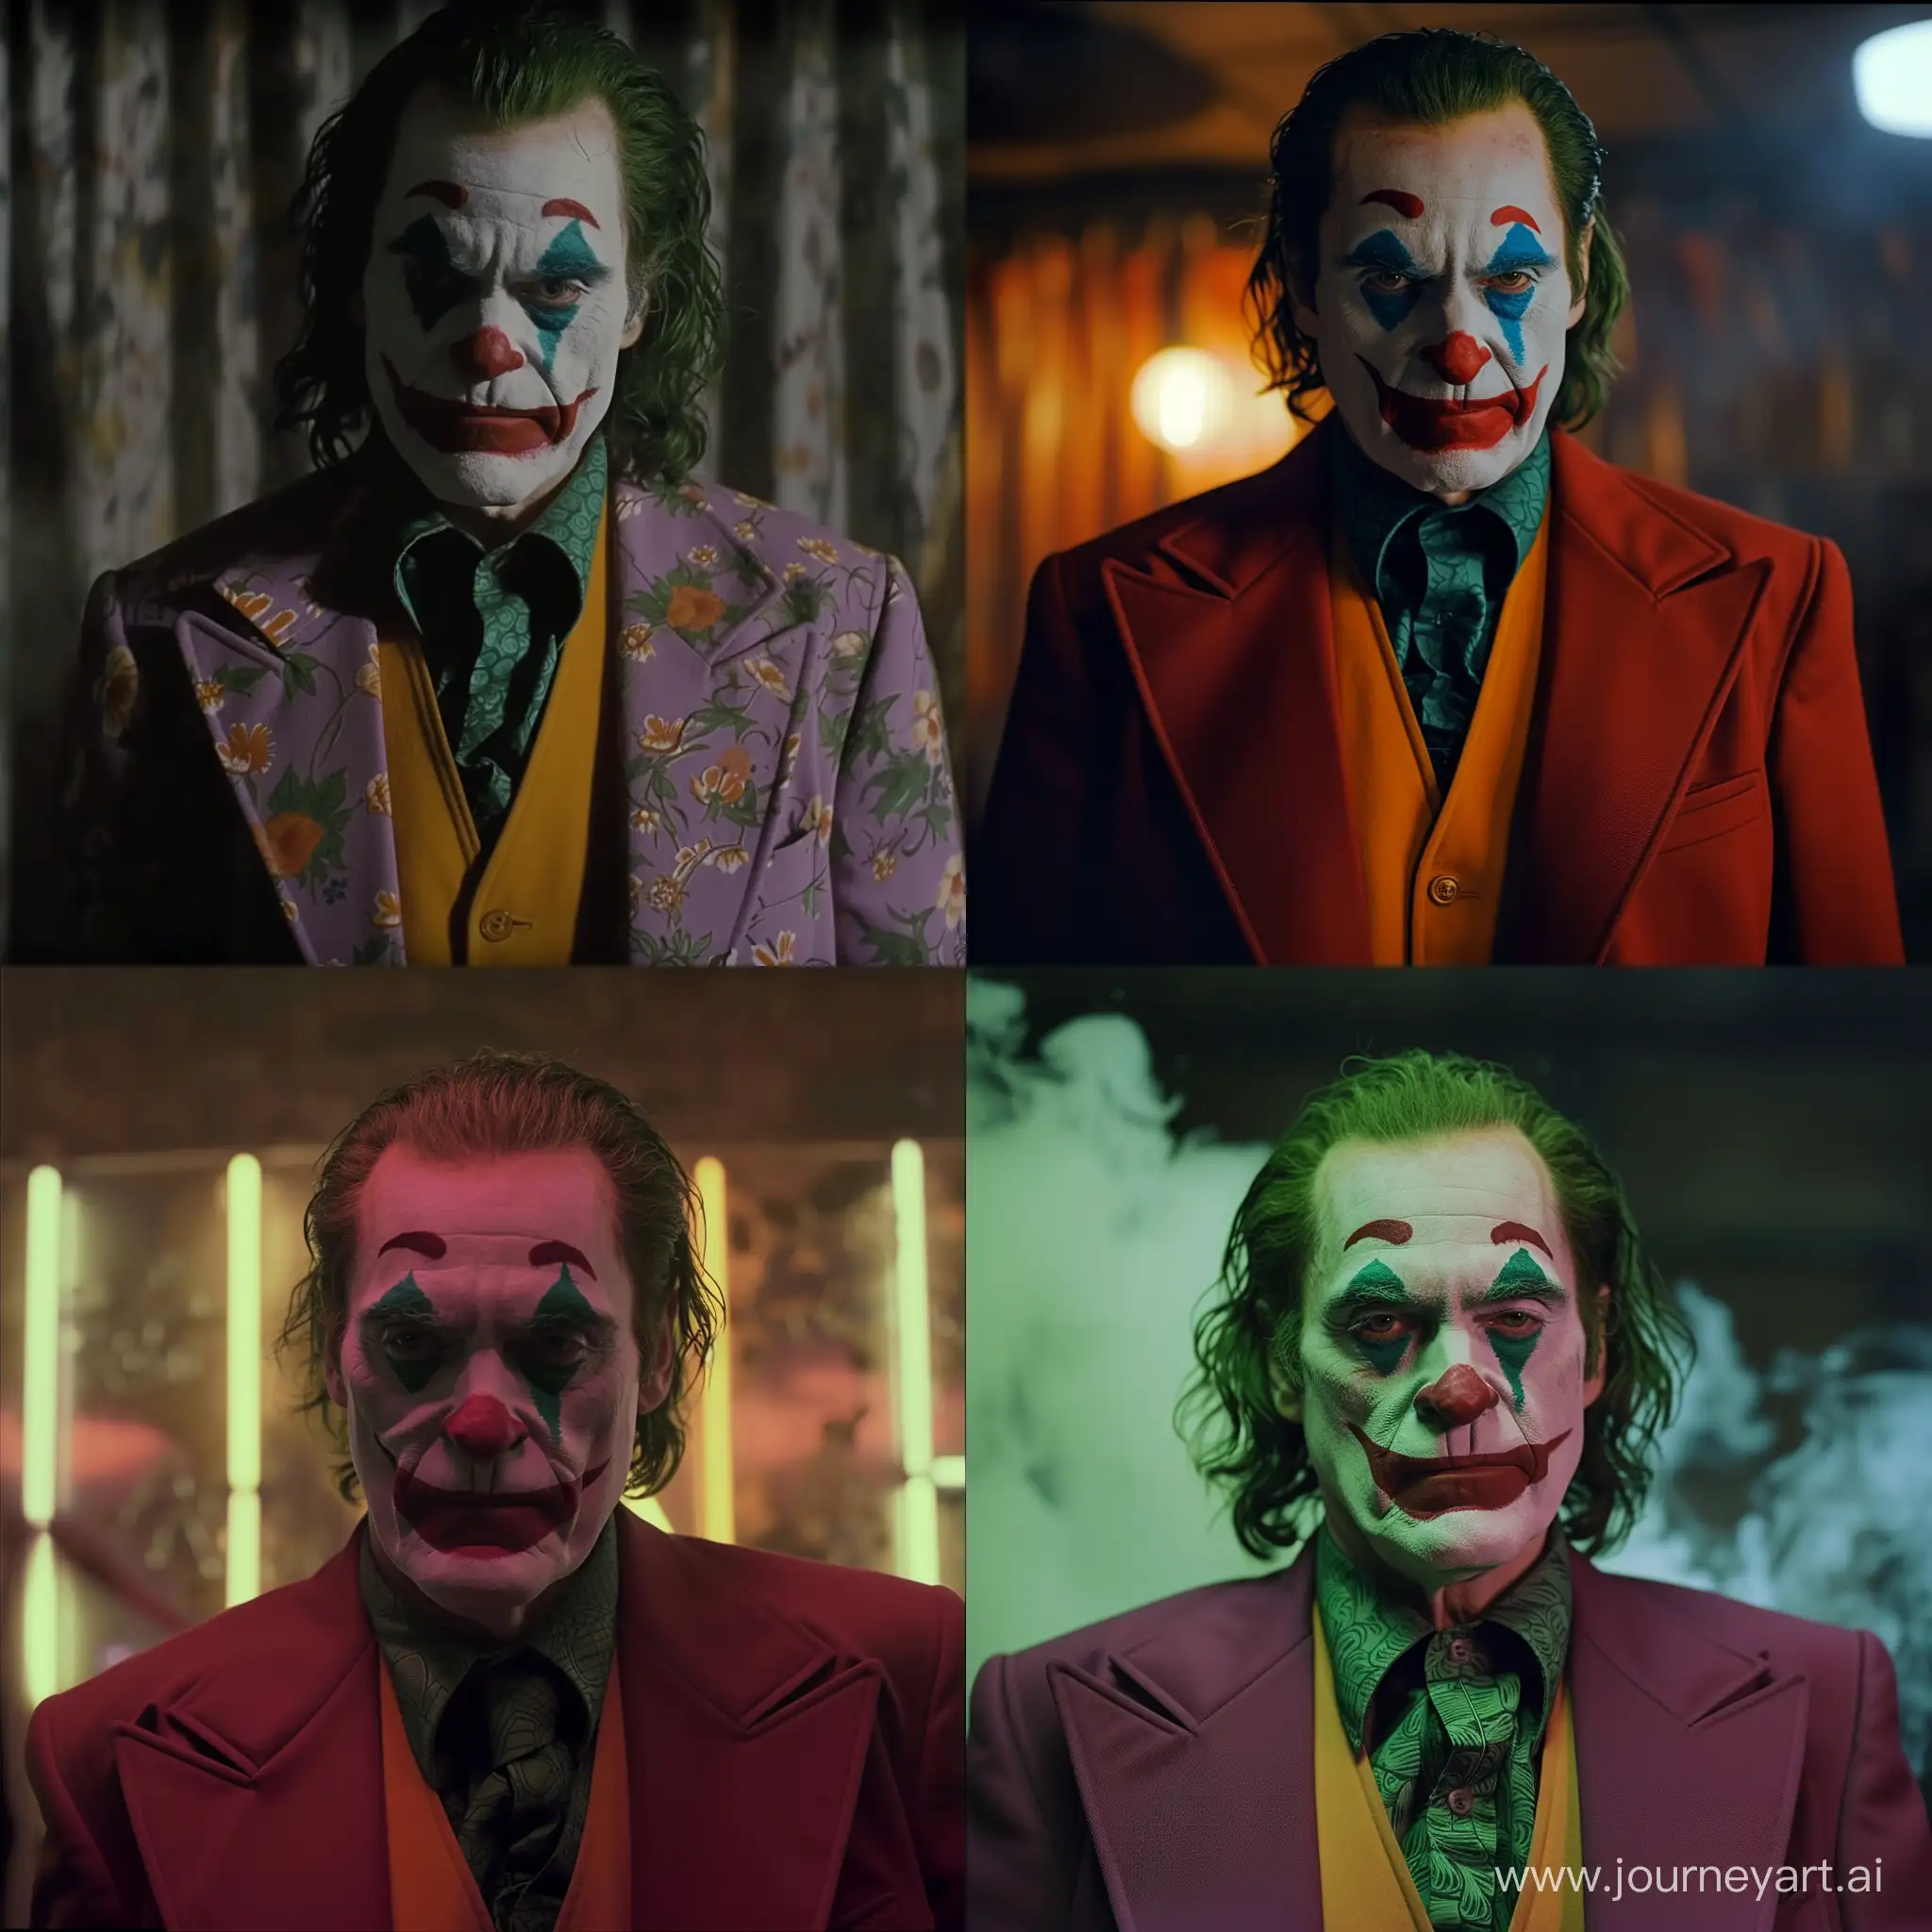 dvd screengrab from a film, (bryan Cranston) as joker, in a joker costume with new designs and color schemes, aesthetic and soft, with 1980s film effects